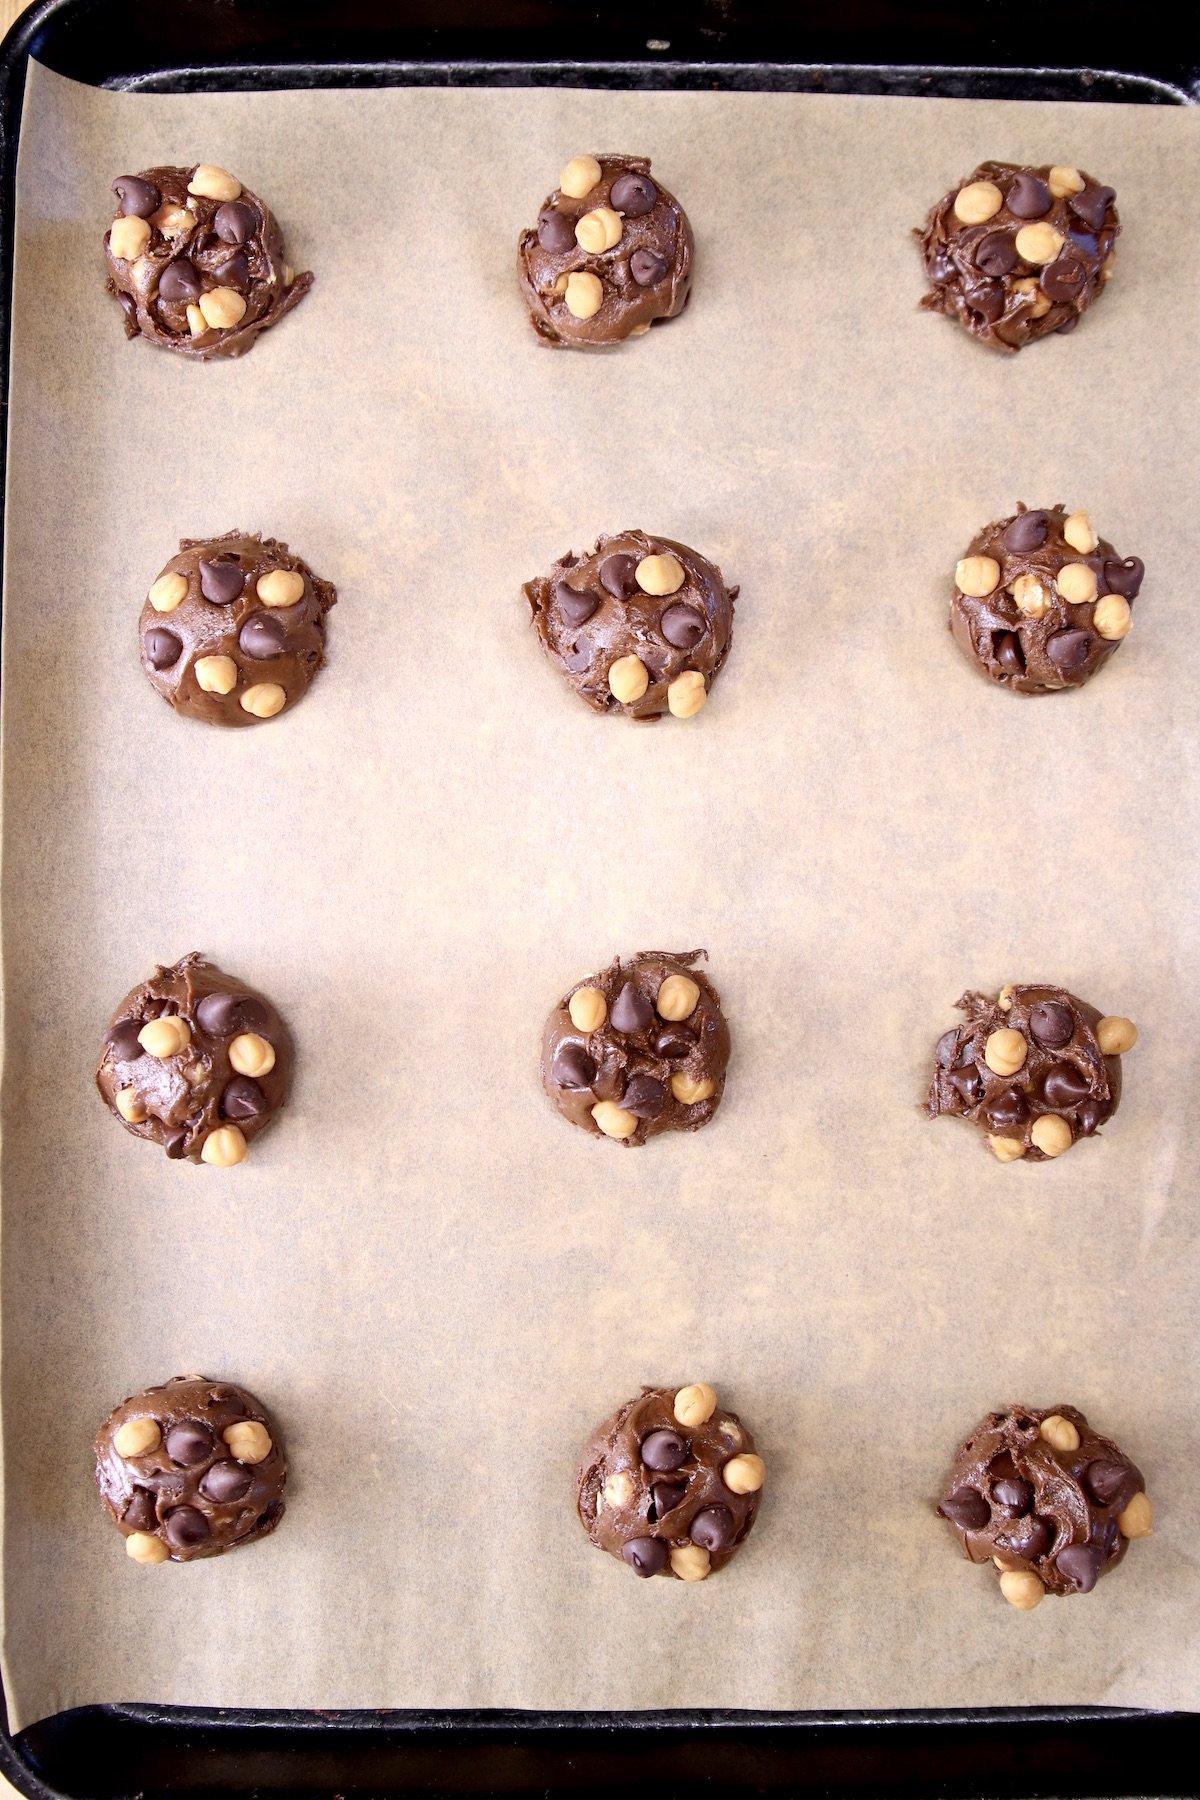 cookie dough balls with chocolate chips and caramel bits on a parchment lined baking sheet